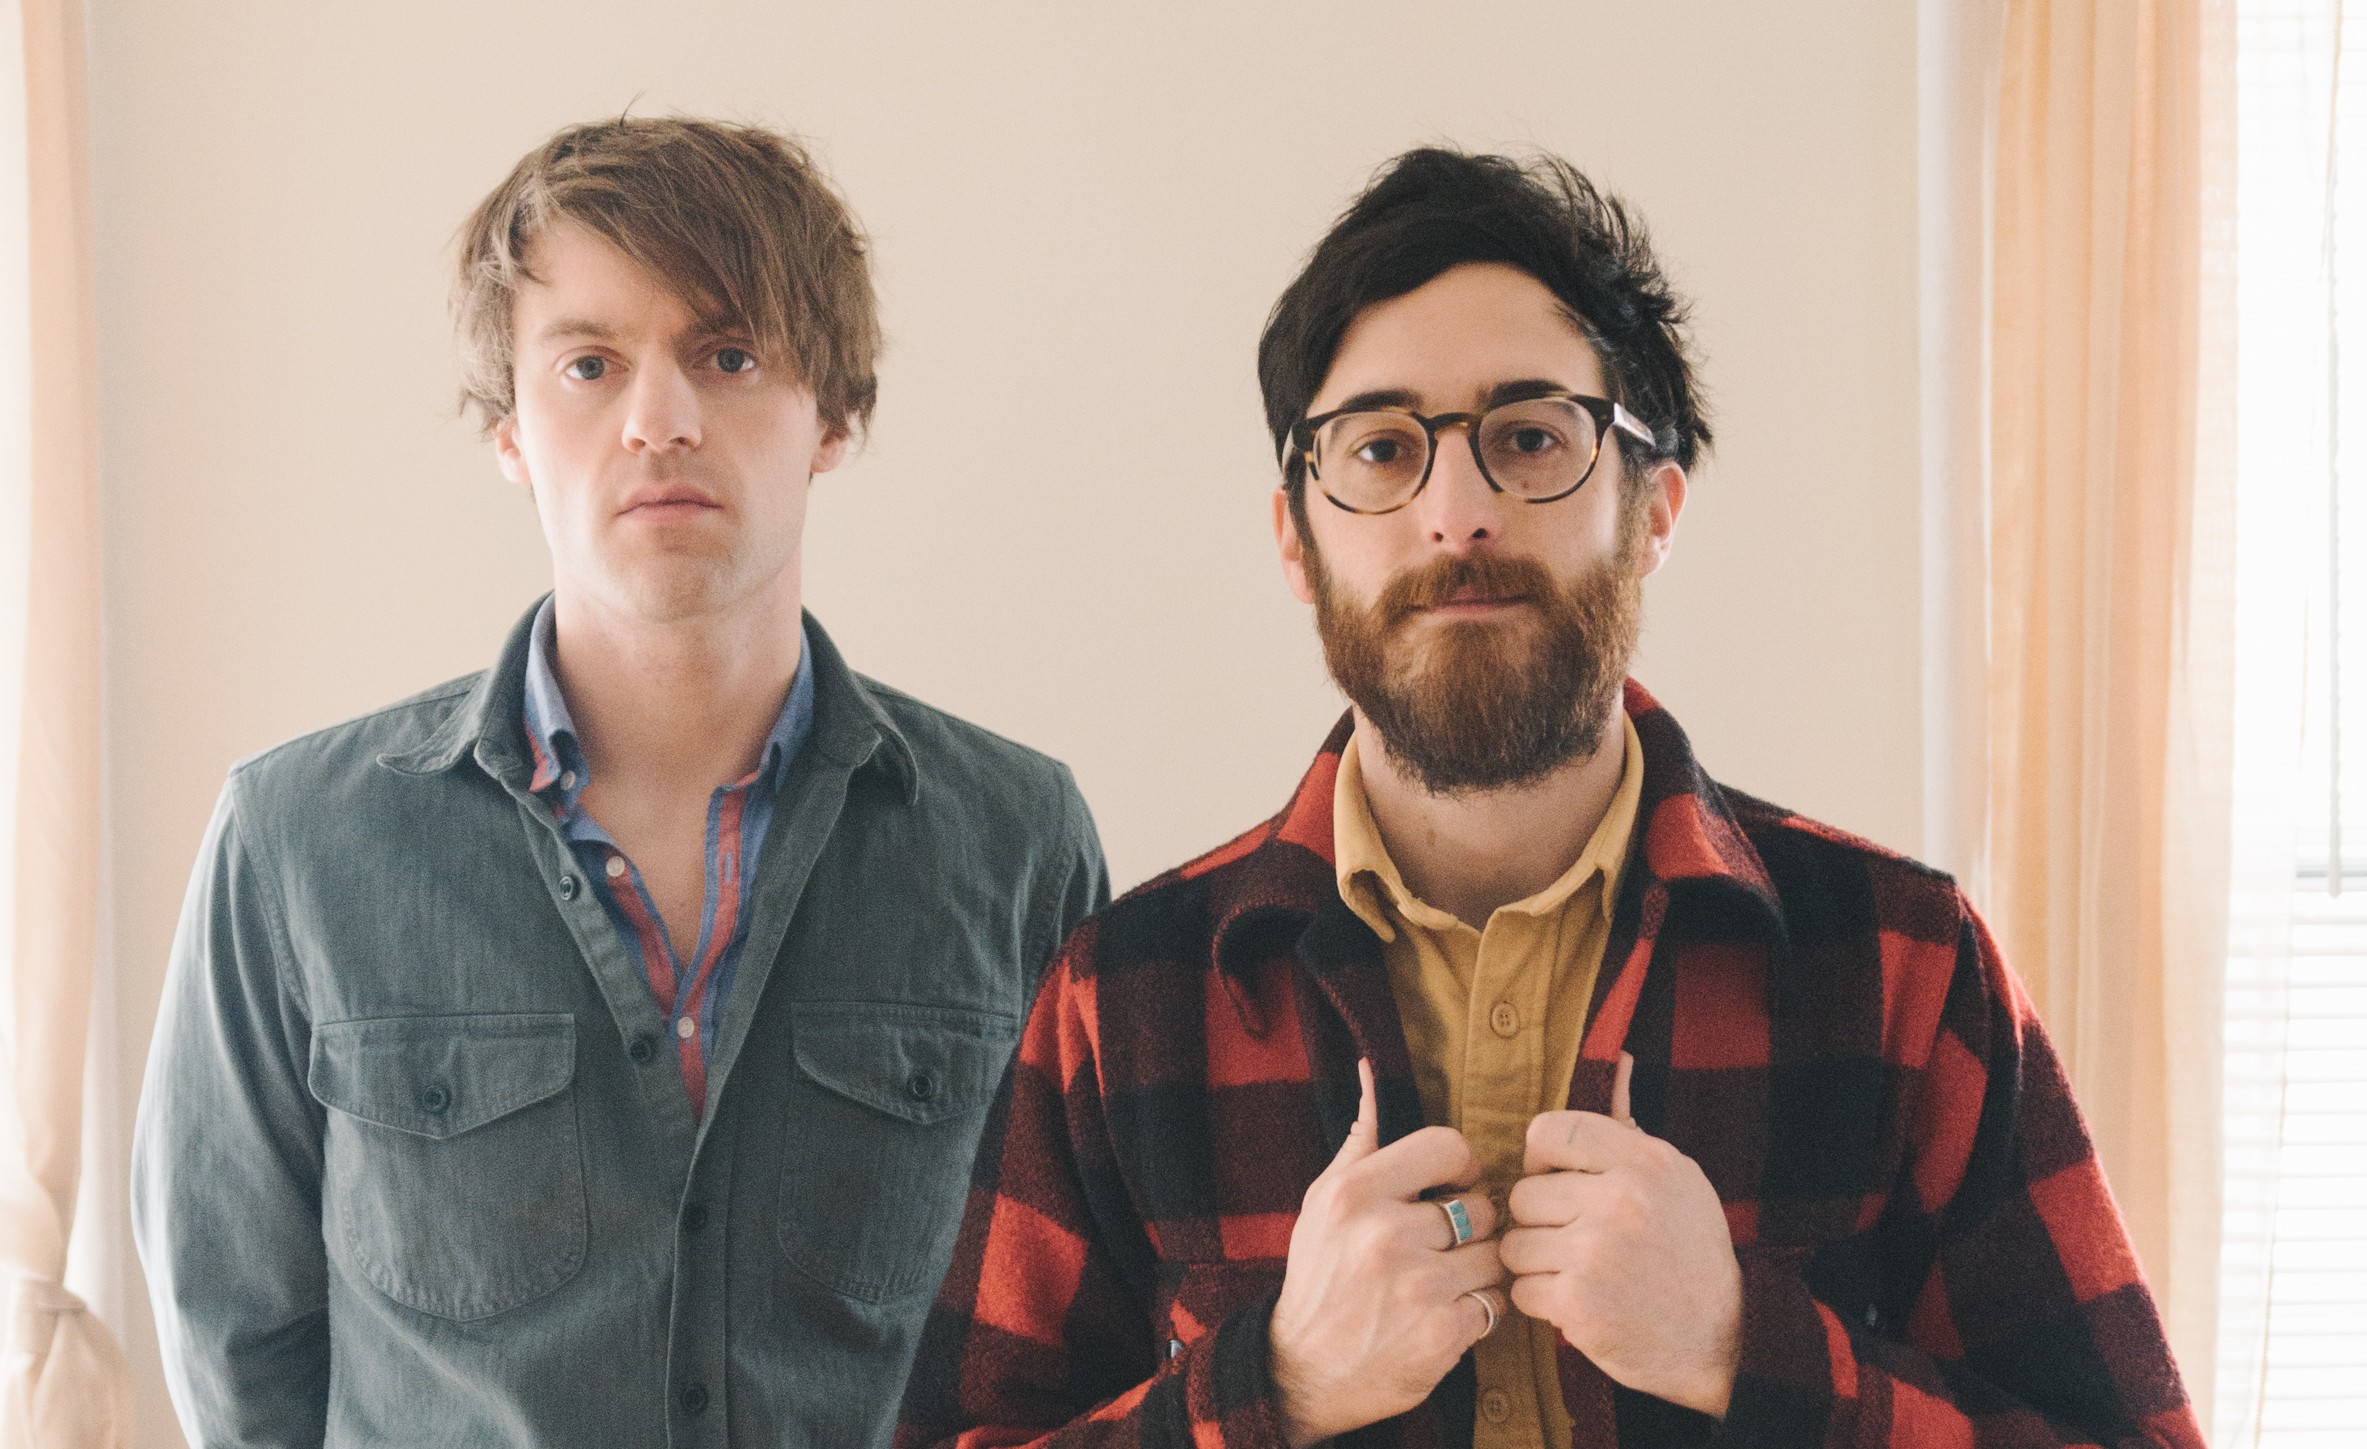 Woods share title track from new LP & talk to Noisey, plus European tour dates